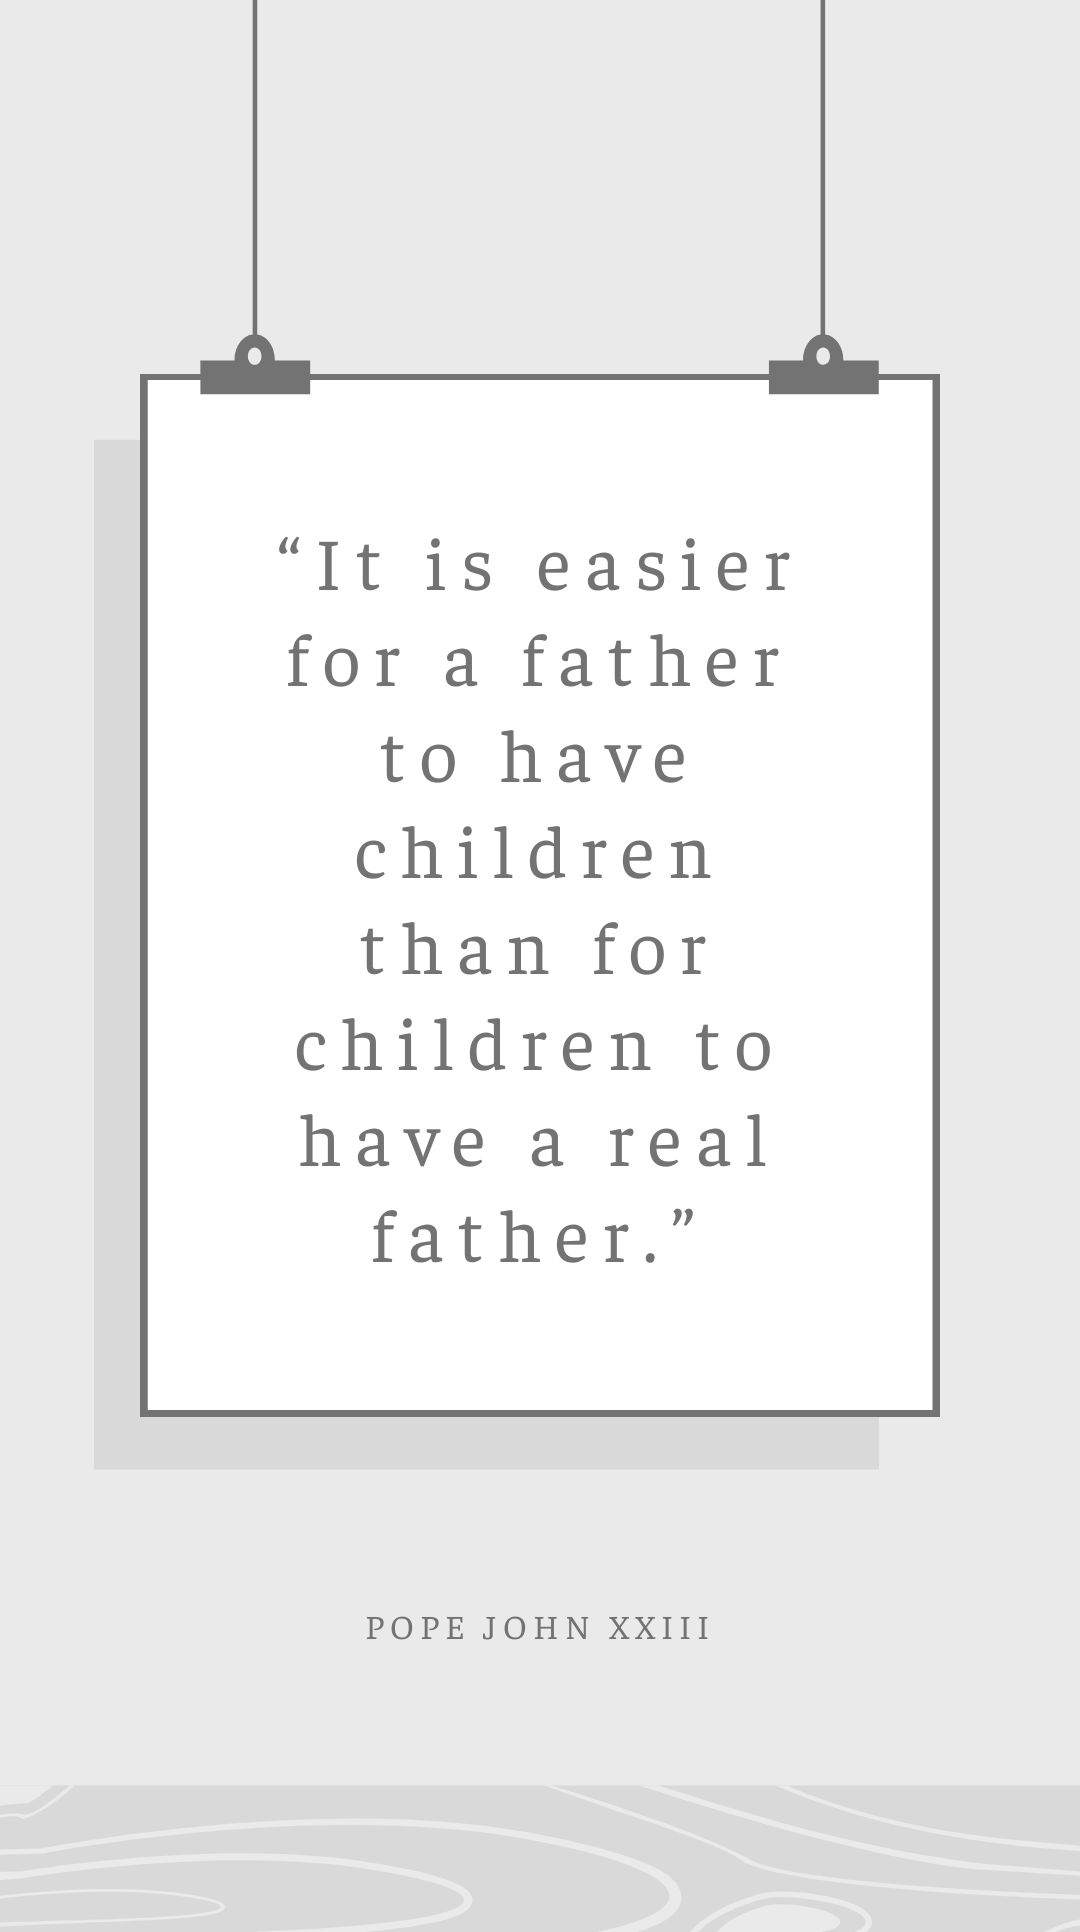 Pope John XXIII - “It is easier for a father to have children than for children to have a real father.”